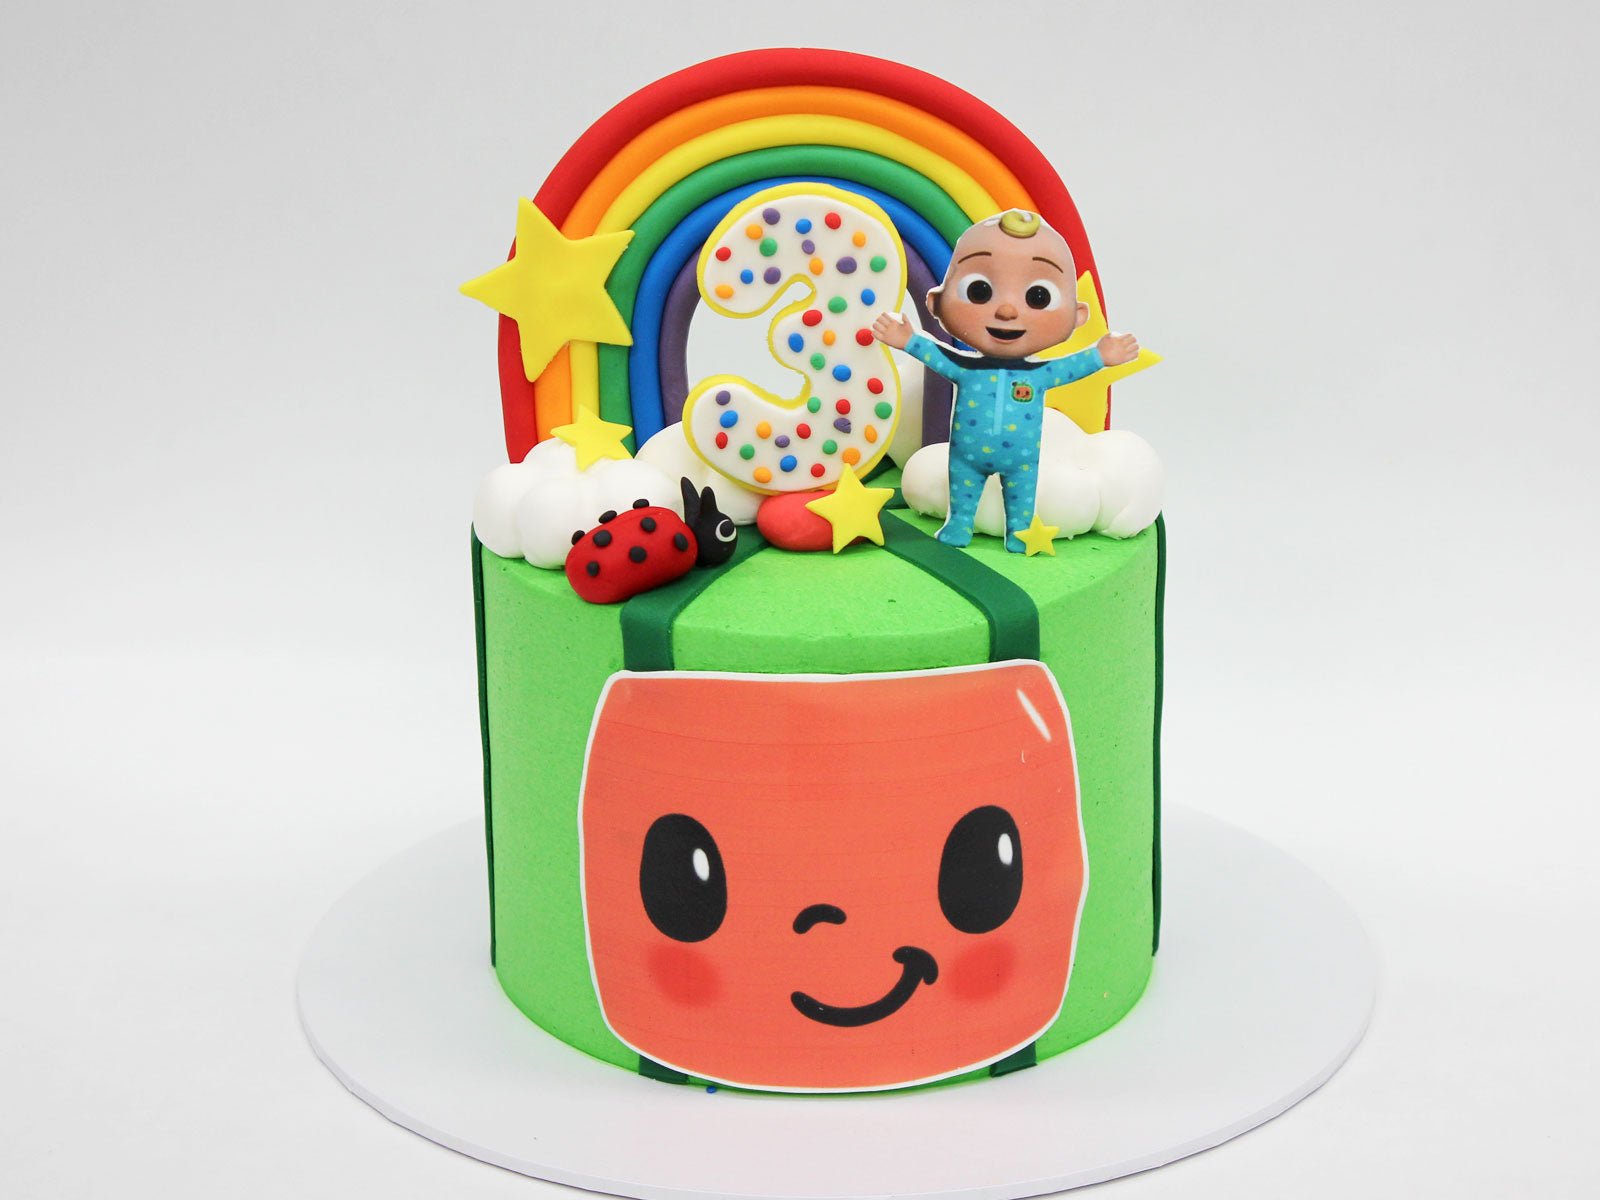 Rainbow Birthday Cake 3D Pop Up Card by Lovepop – Outer Layer